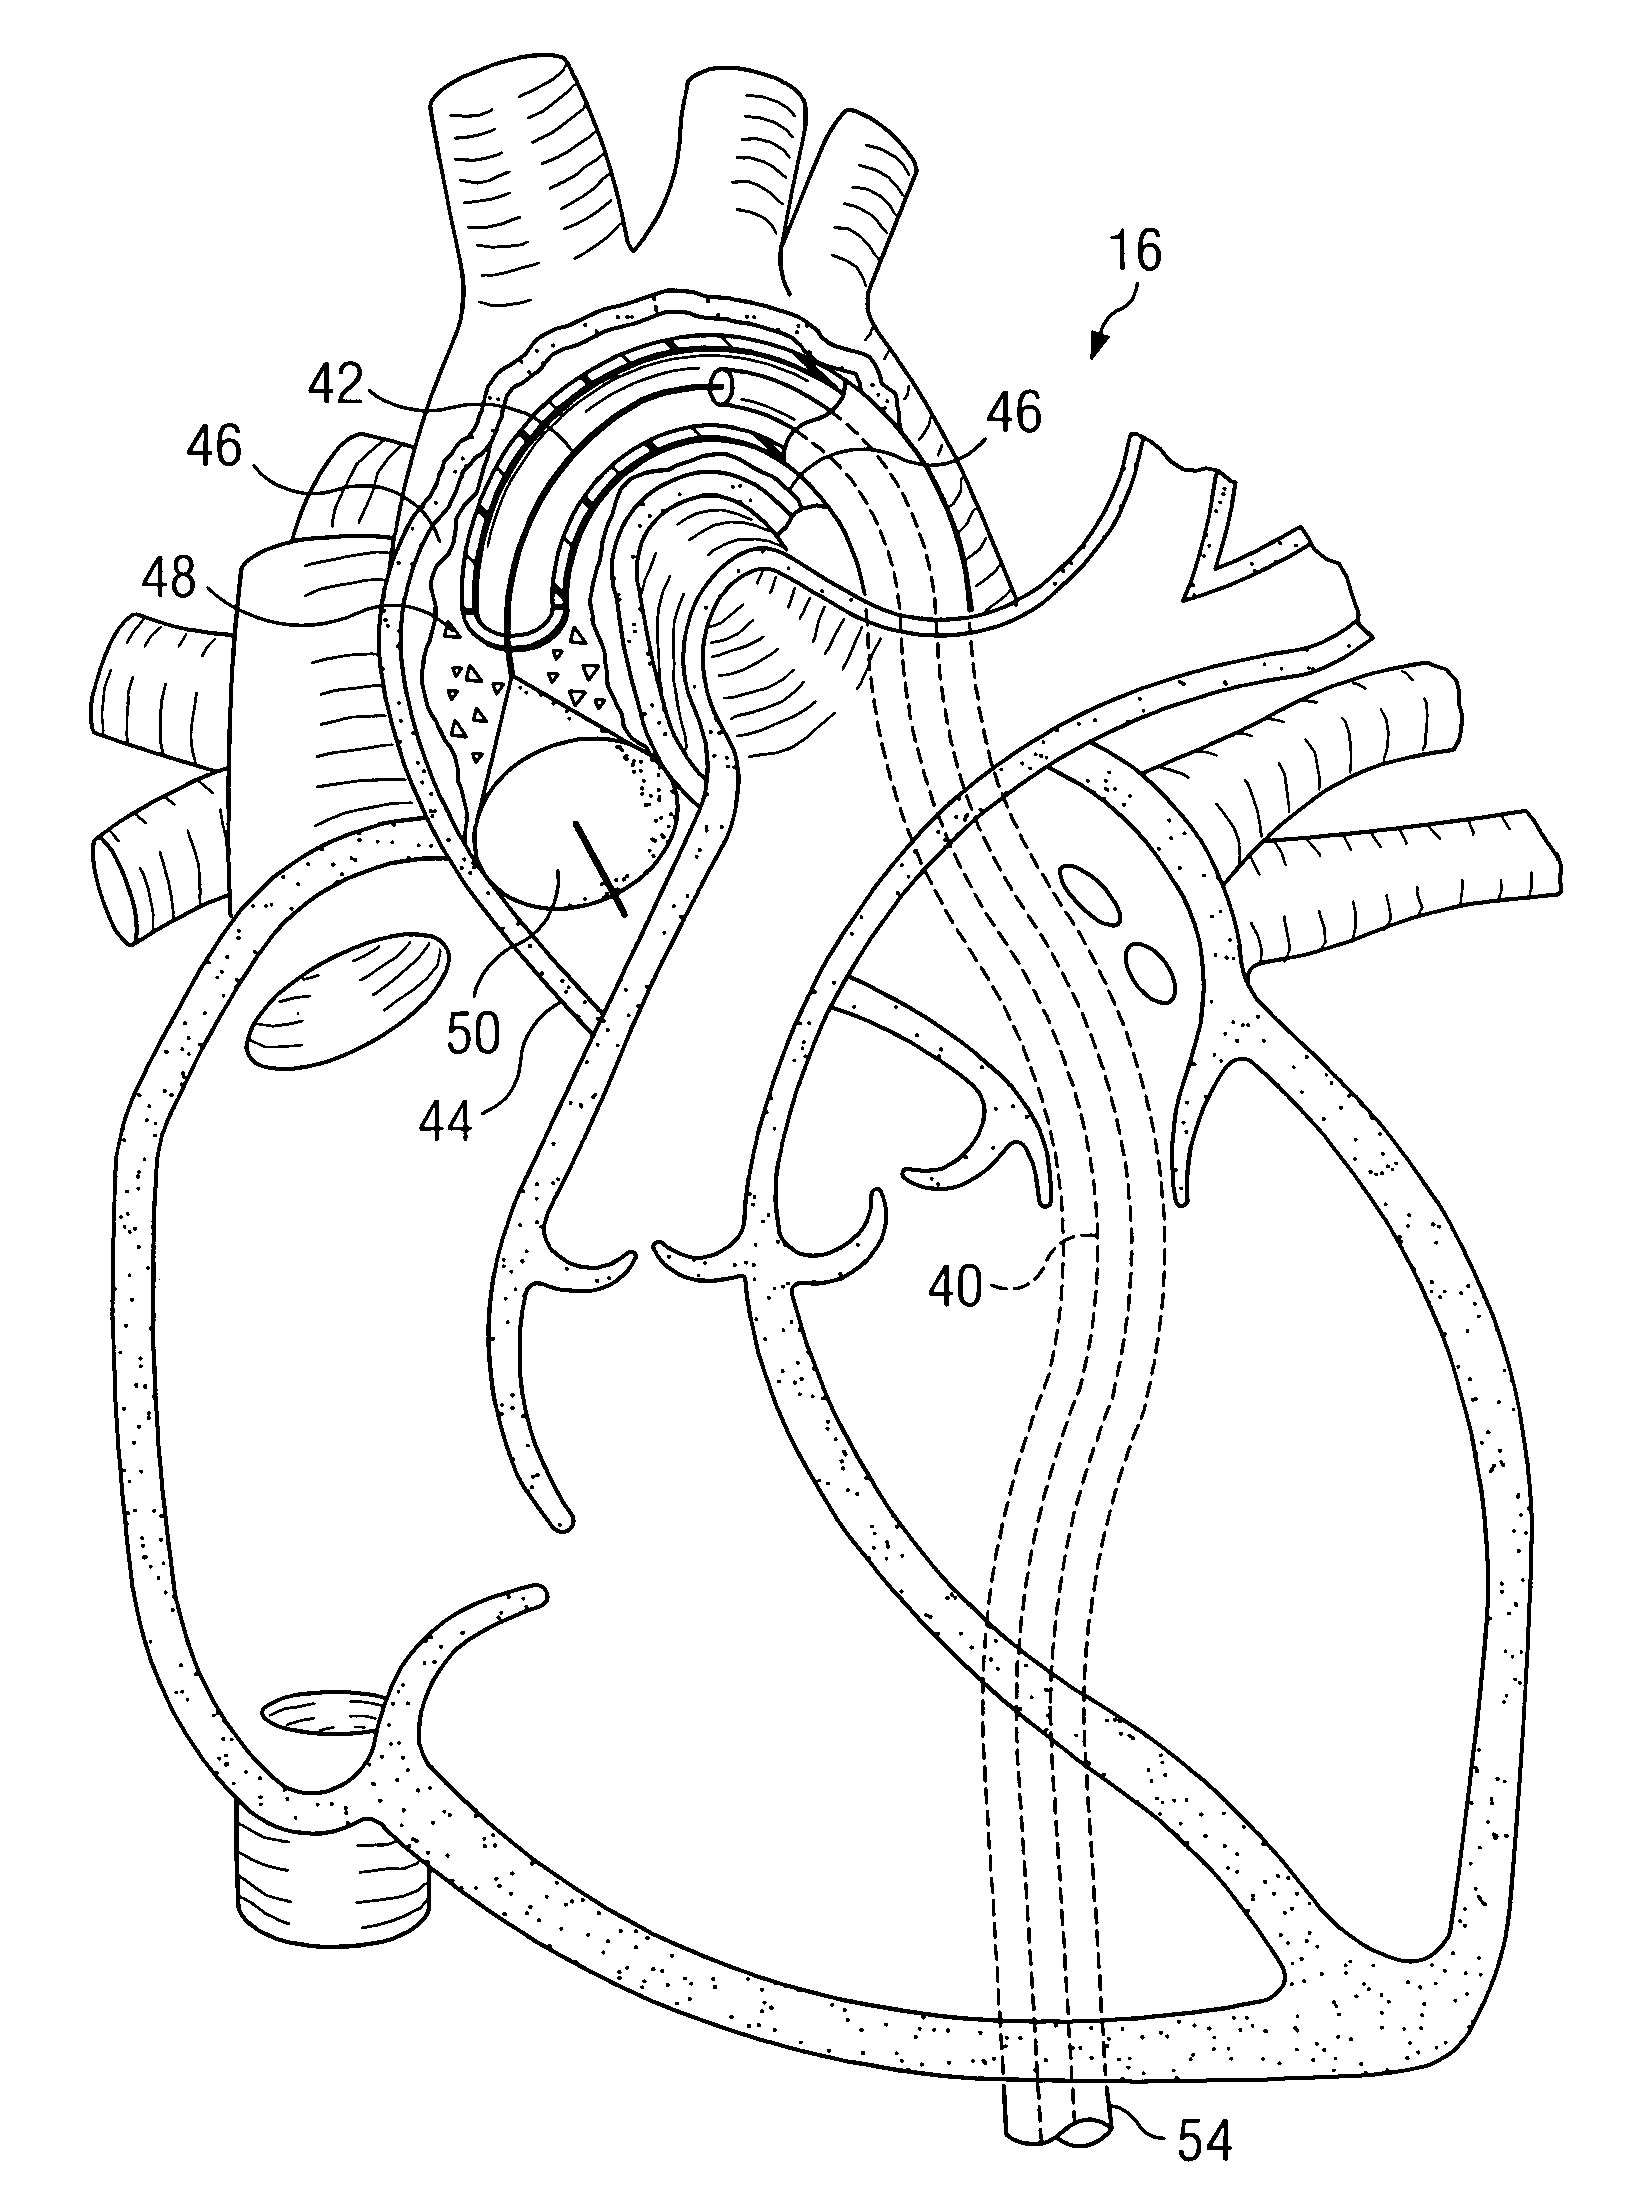 System and method for providing embolic protection